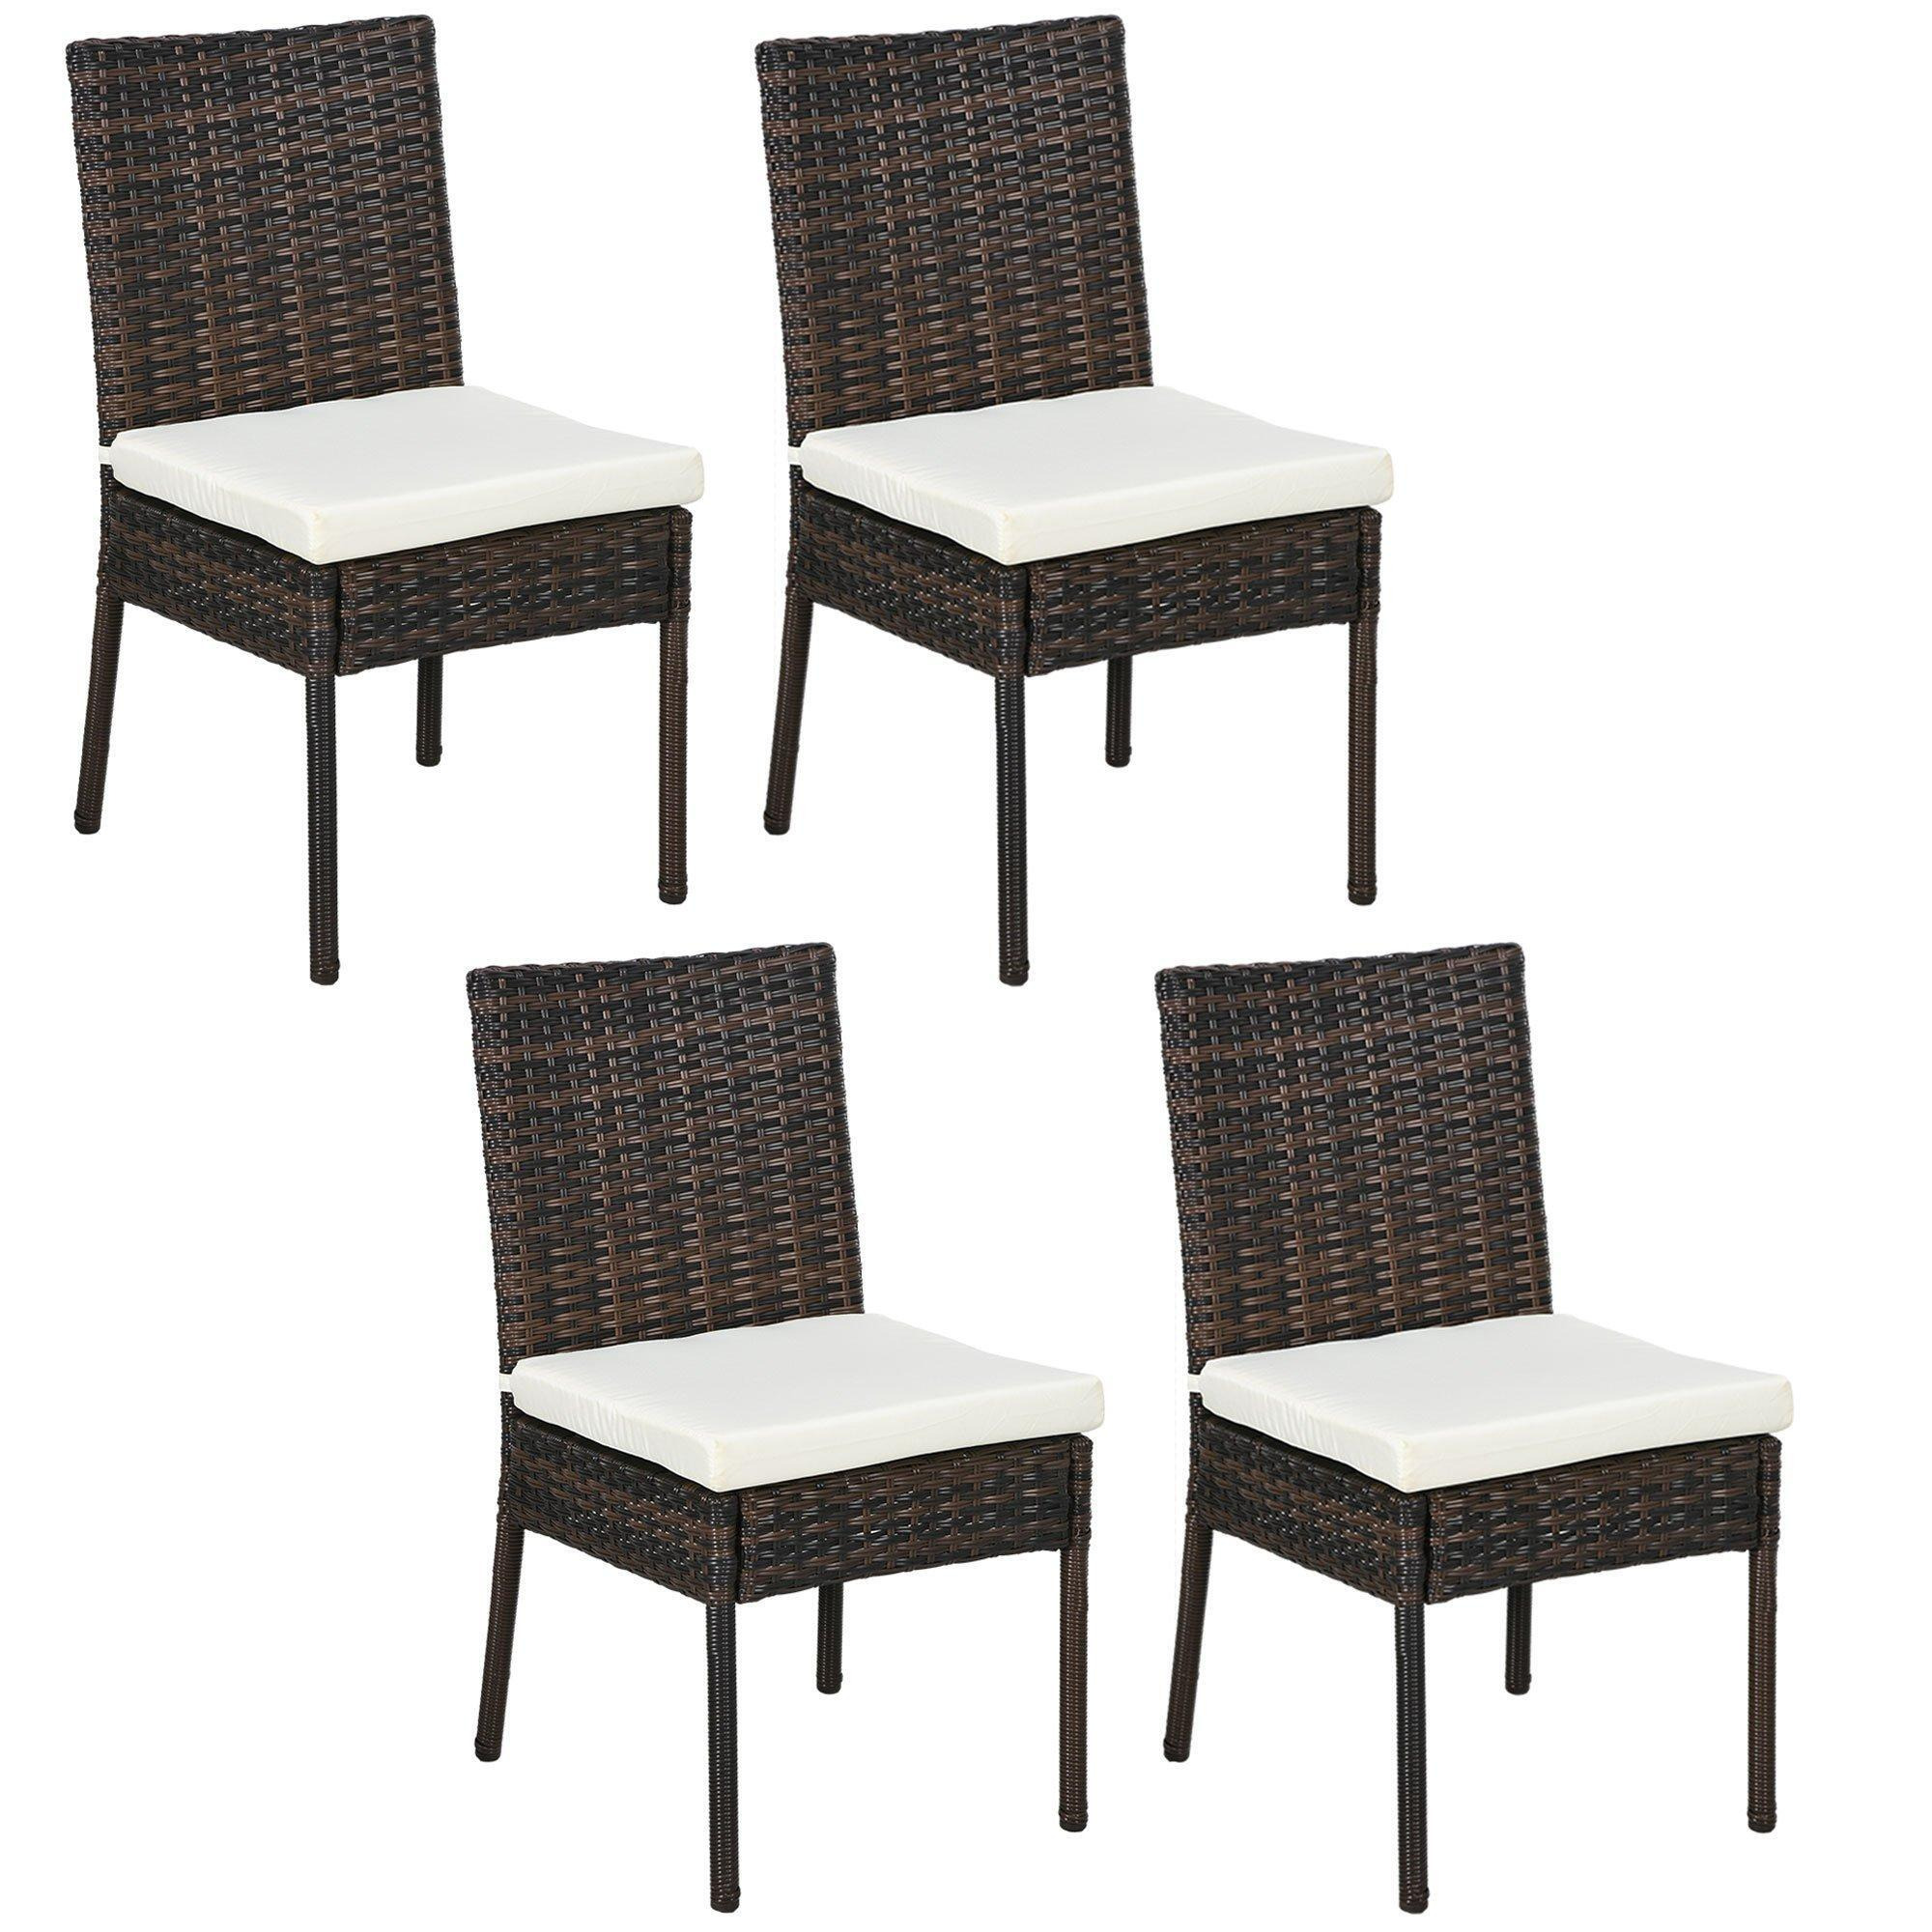 4 PCs Rattan Garden Chairs with Cushion, Wicker Dining Chairs - image 1